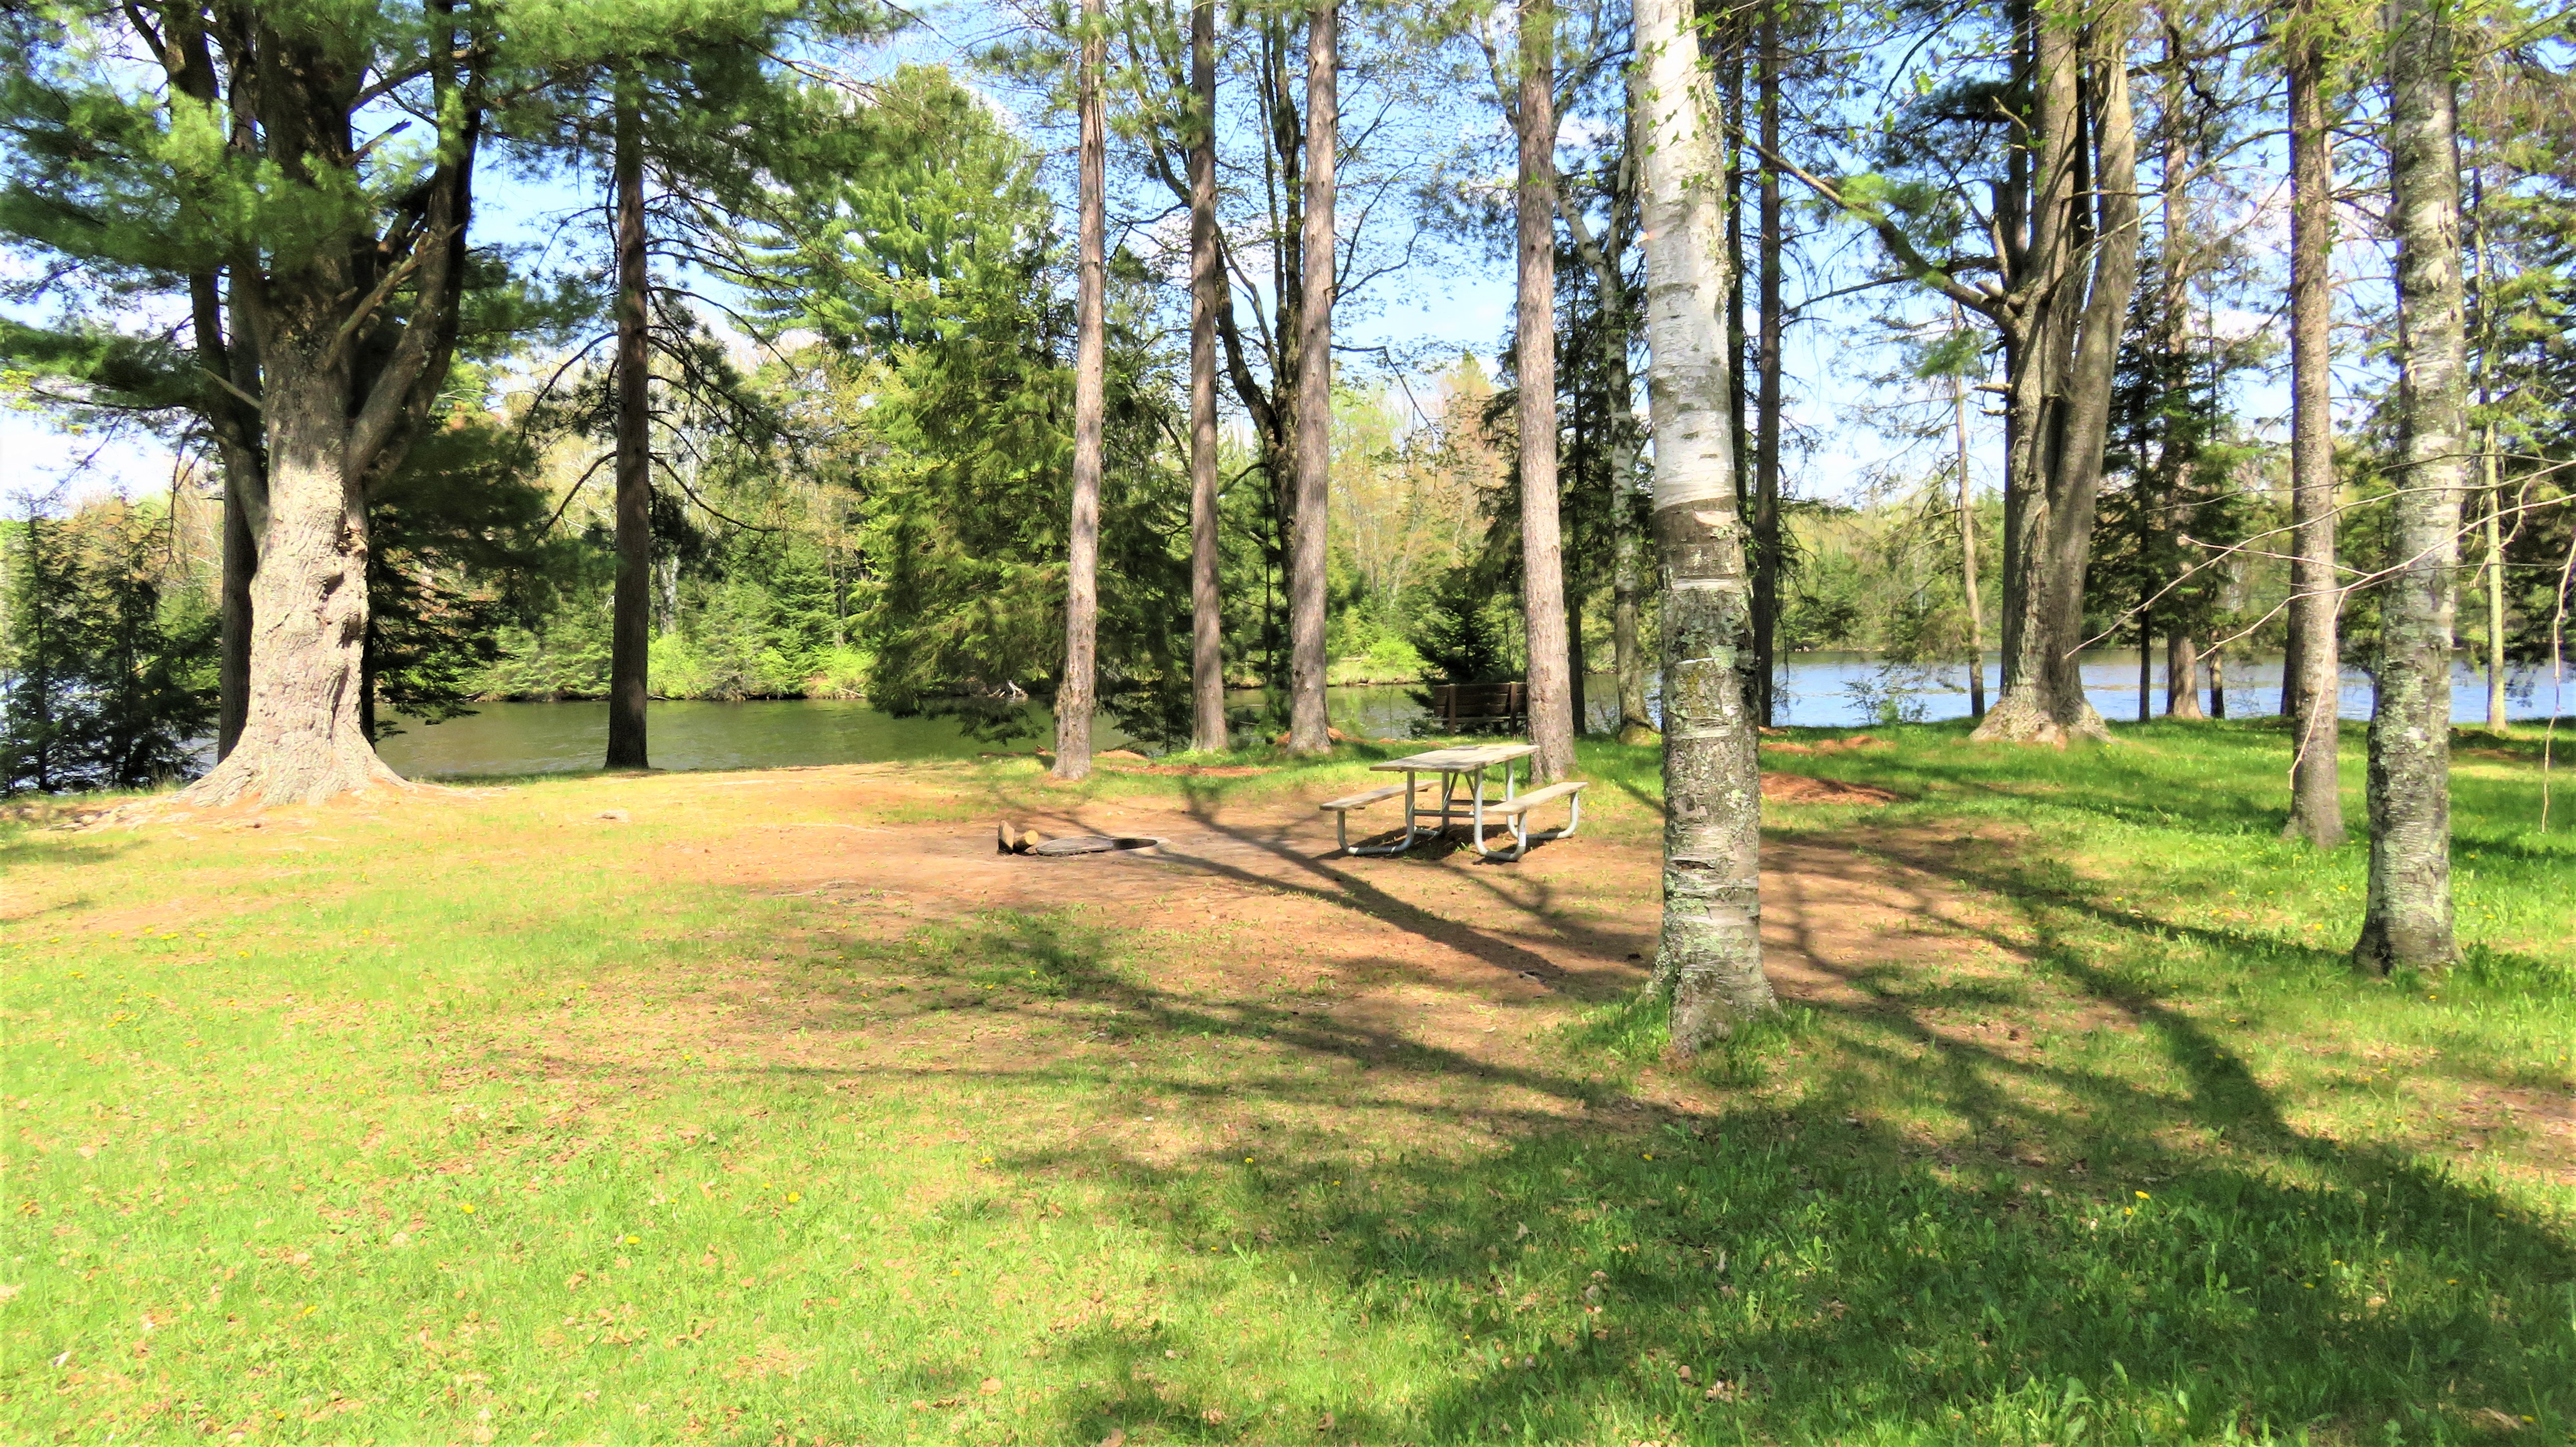 Picnic Point Campground